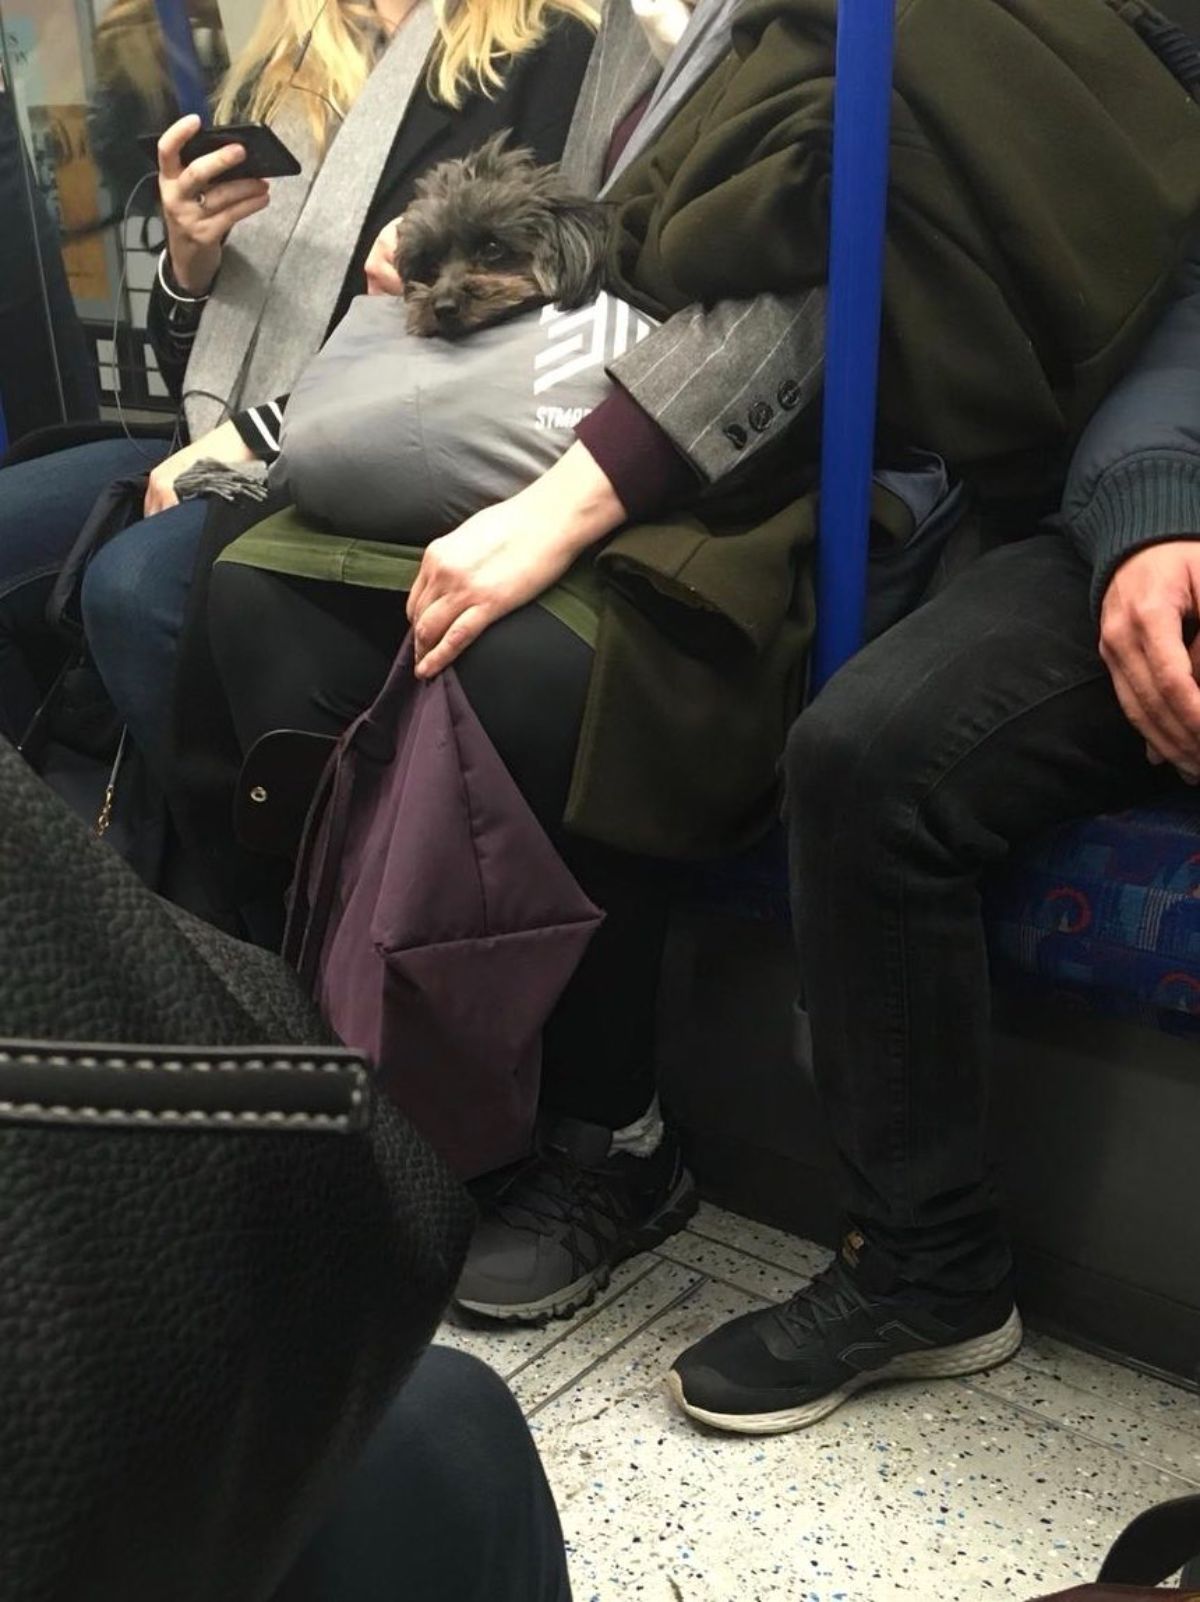 small fluffy black and brown dog in a grey bag on someone's lap surrounded by people on a train